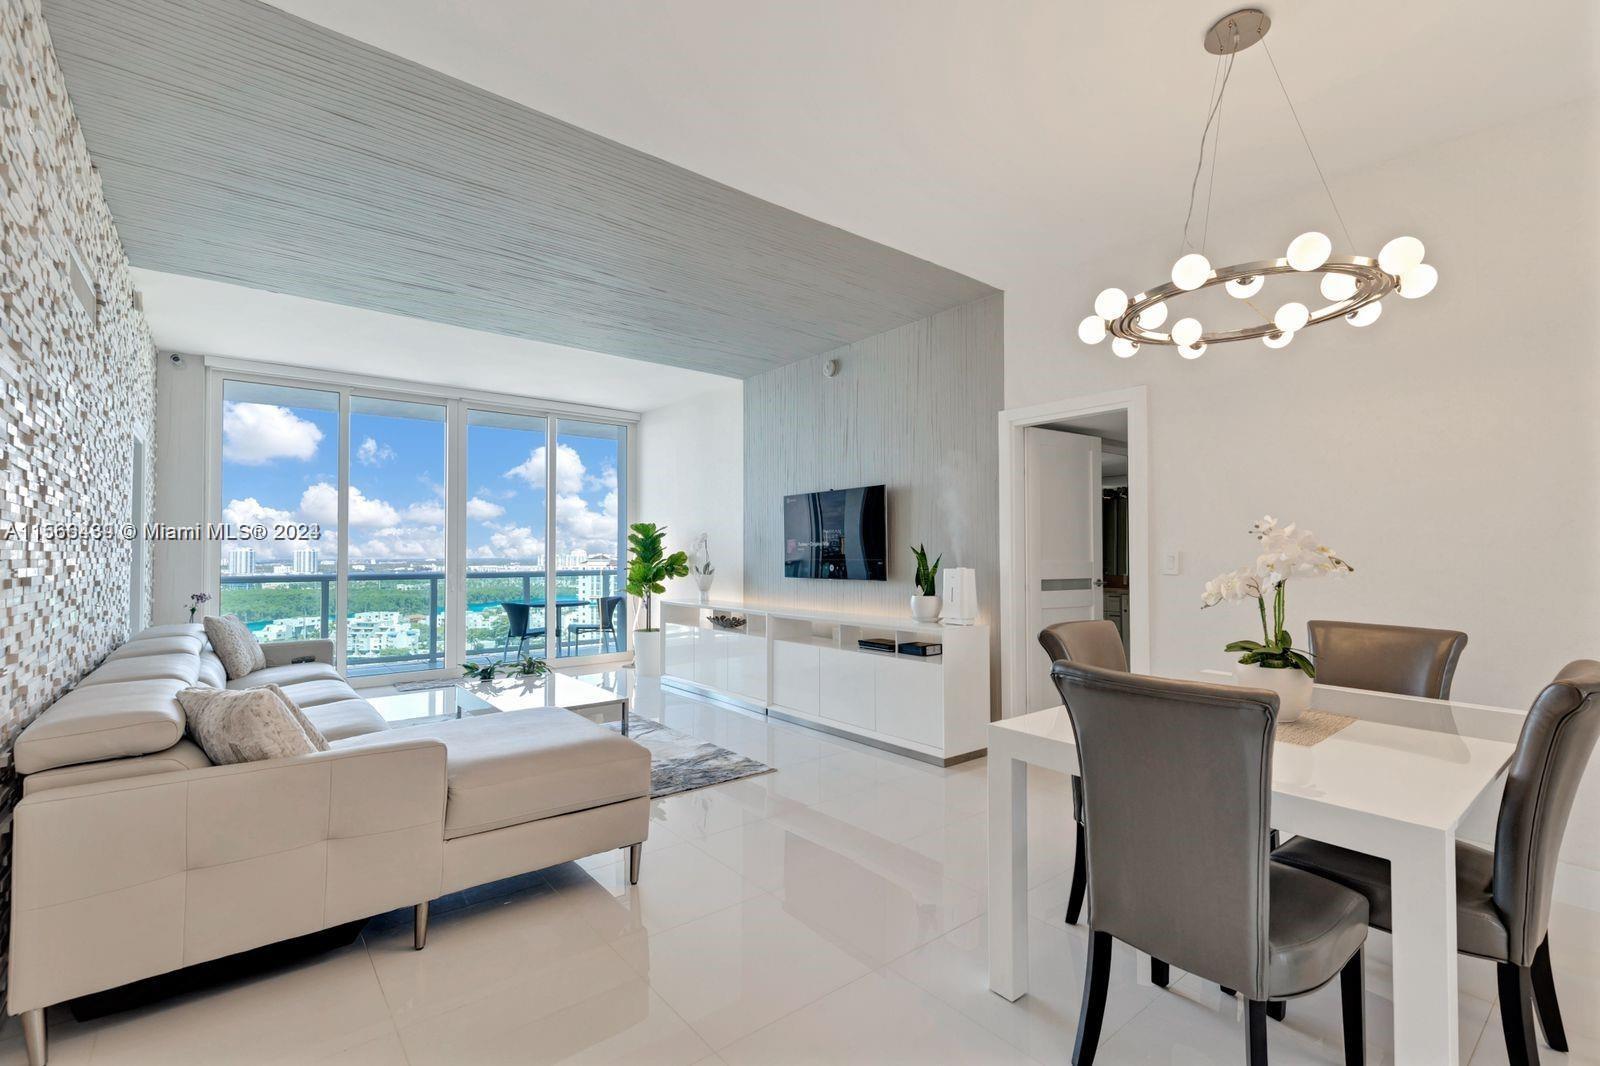 COME ENJOY THIS BEAUTIFUL PENTHOUSE 2 BED 2 BATHS, COMPLETELY REMODELED WITH SPECTACULAR BAY VIEW AN